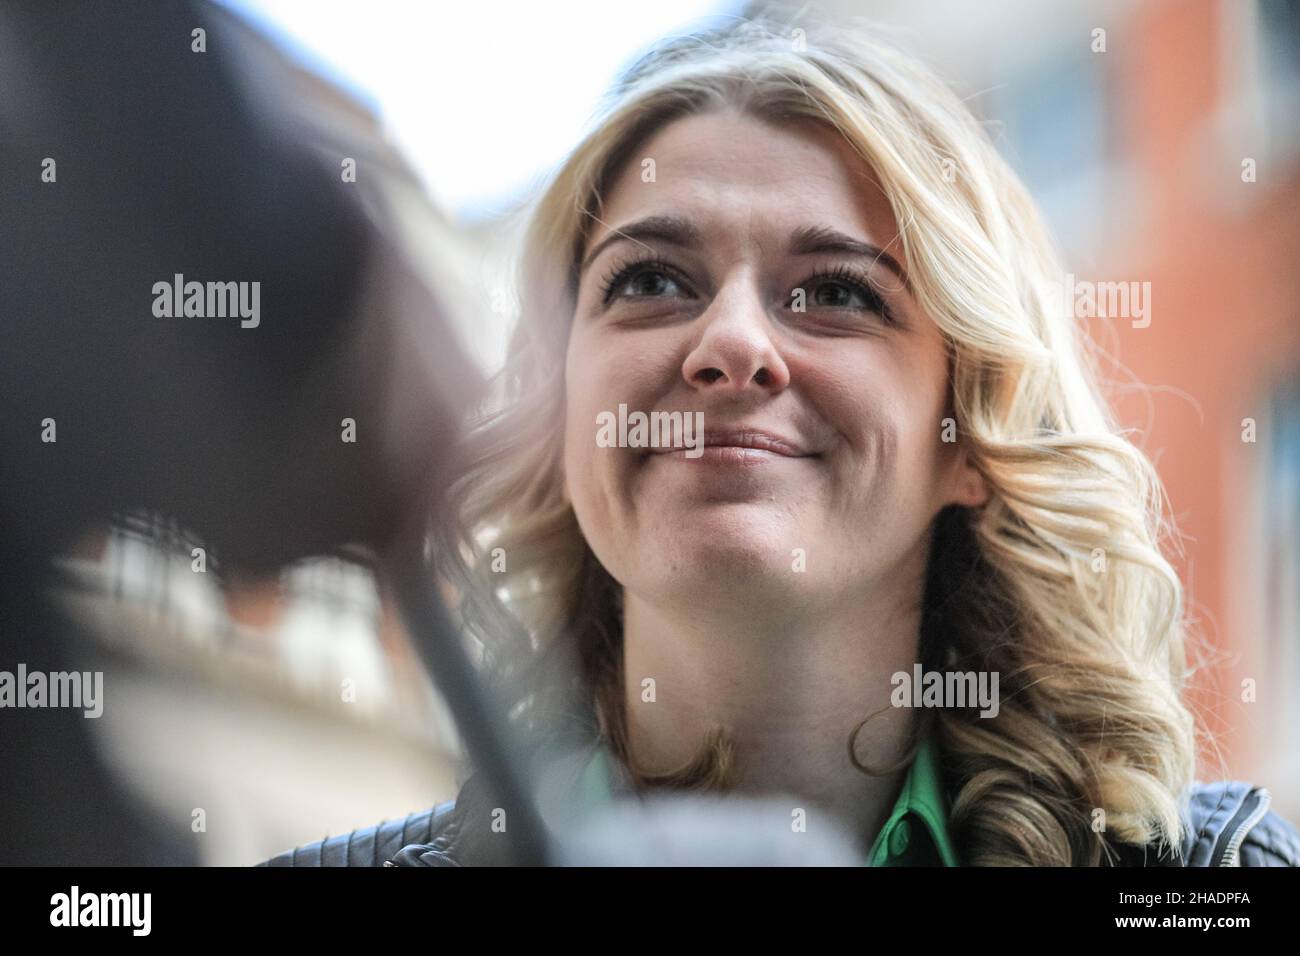 London, UK. 12th Dec, 2021. Dehenna Davison, MP, Conservative Party politician, MP for Bishop Aukland since 2019 exits the BBC headquarters in London today following an appearance at the Andrew Marr Show. Davison also co-hosts a Sunday morning broadcast show on GB News. Credit: Imageplotter/Alamy Live News Stock Photo